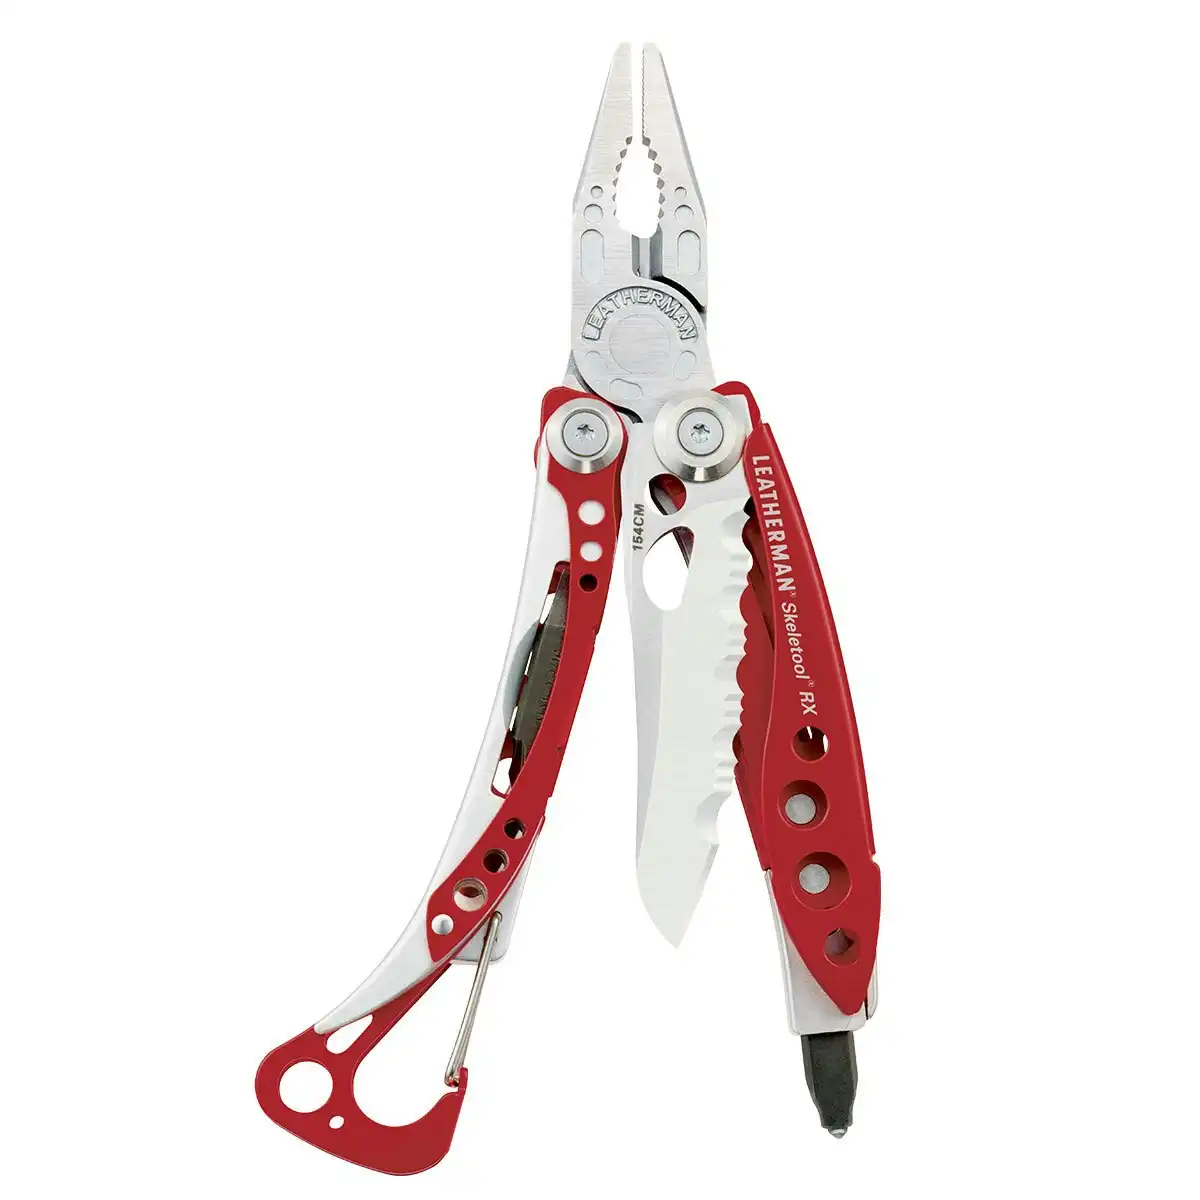 New Leatherman Skeletool Rx Rescue Multi Tool   Red